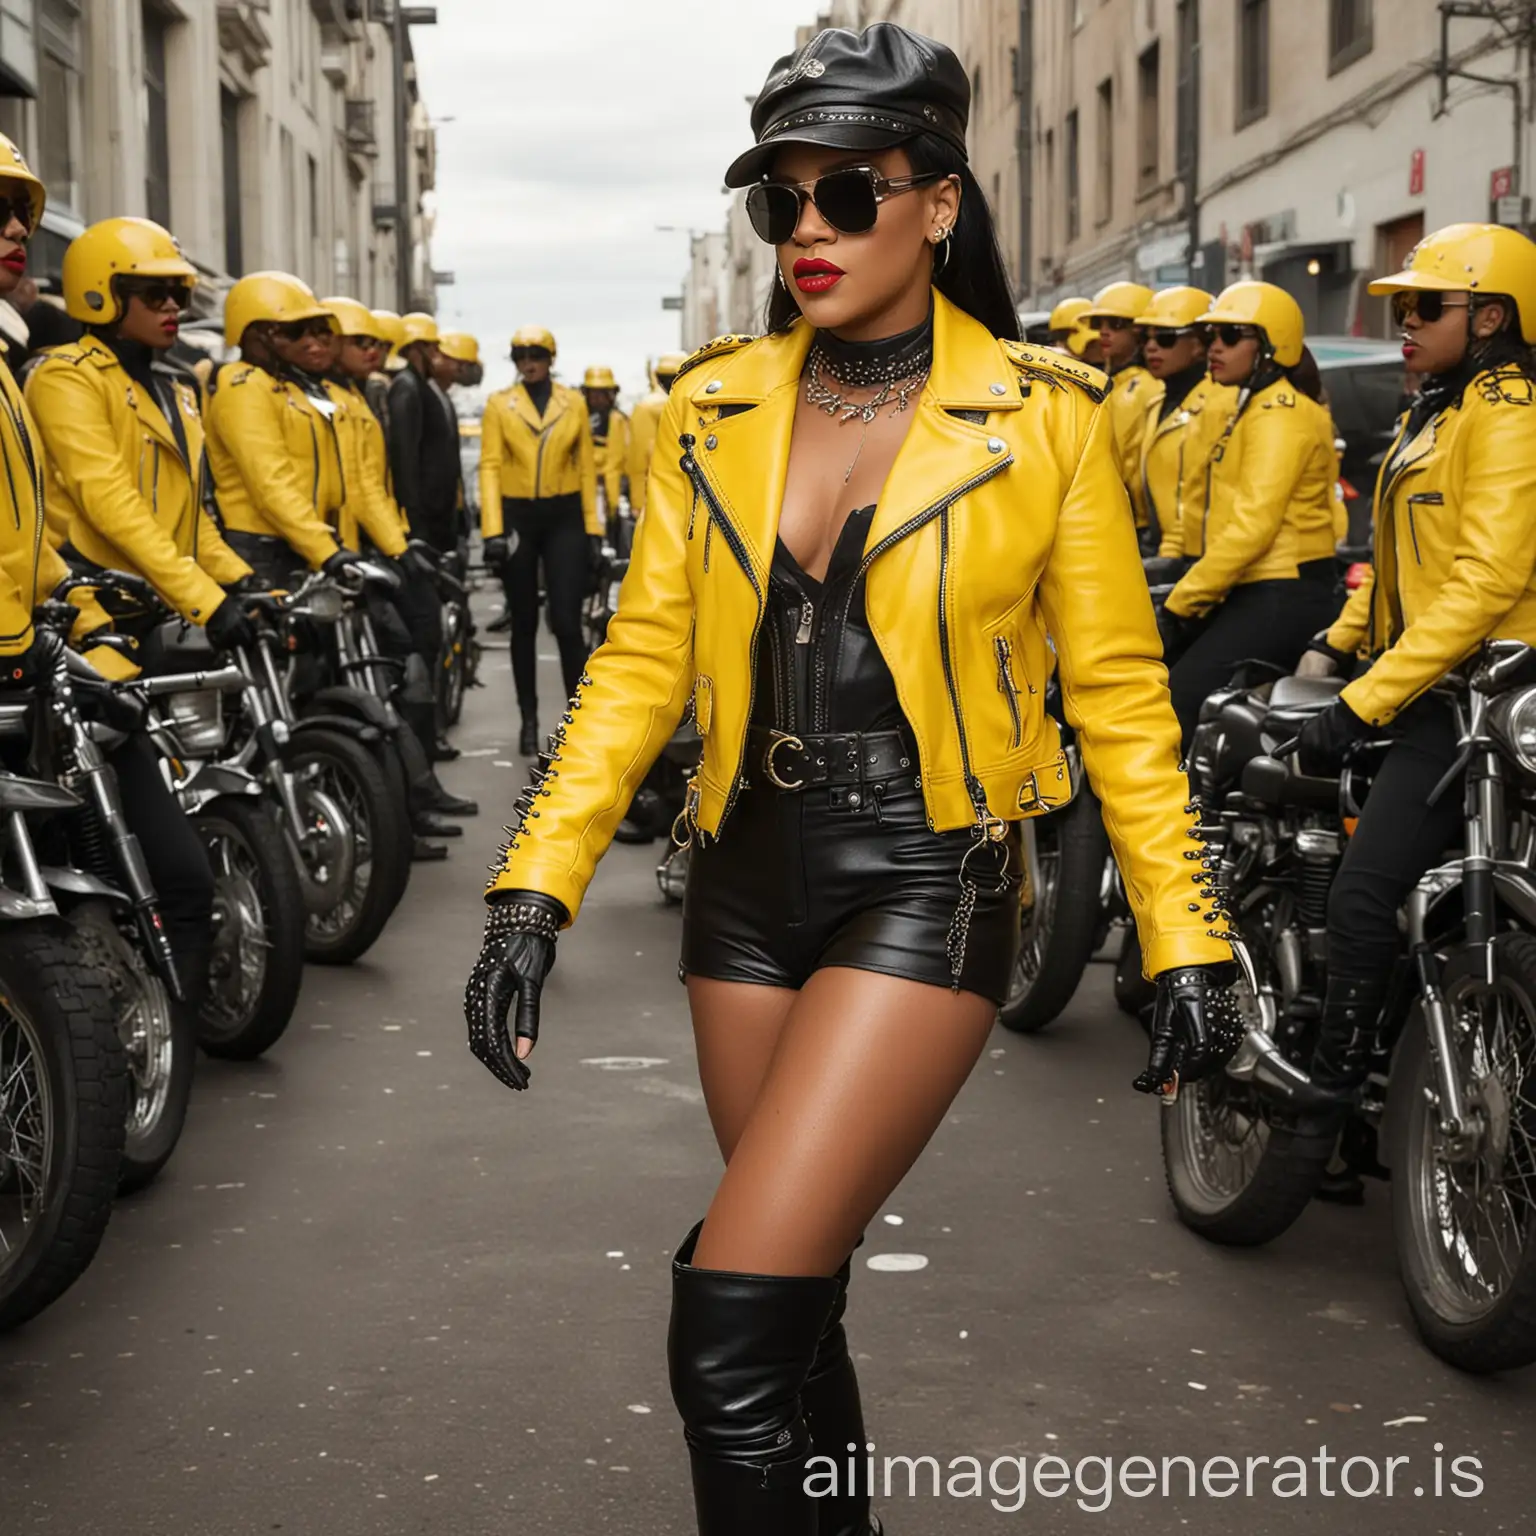 Fashionable-Worship-Rihanna-in-Yellow-Leather-Motorcycle-Attire